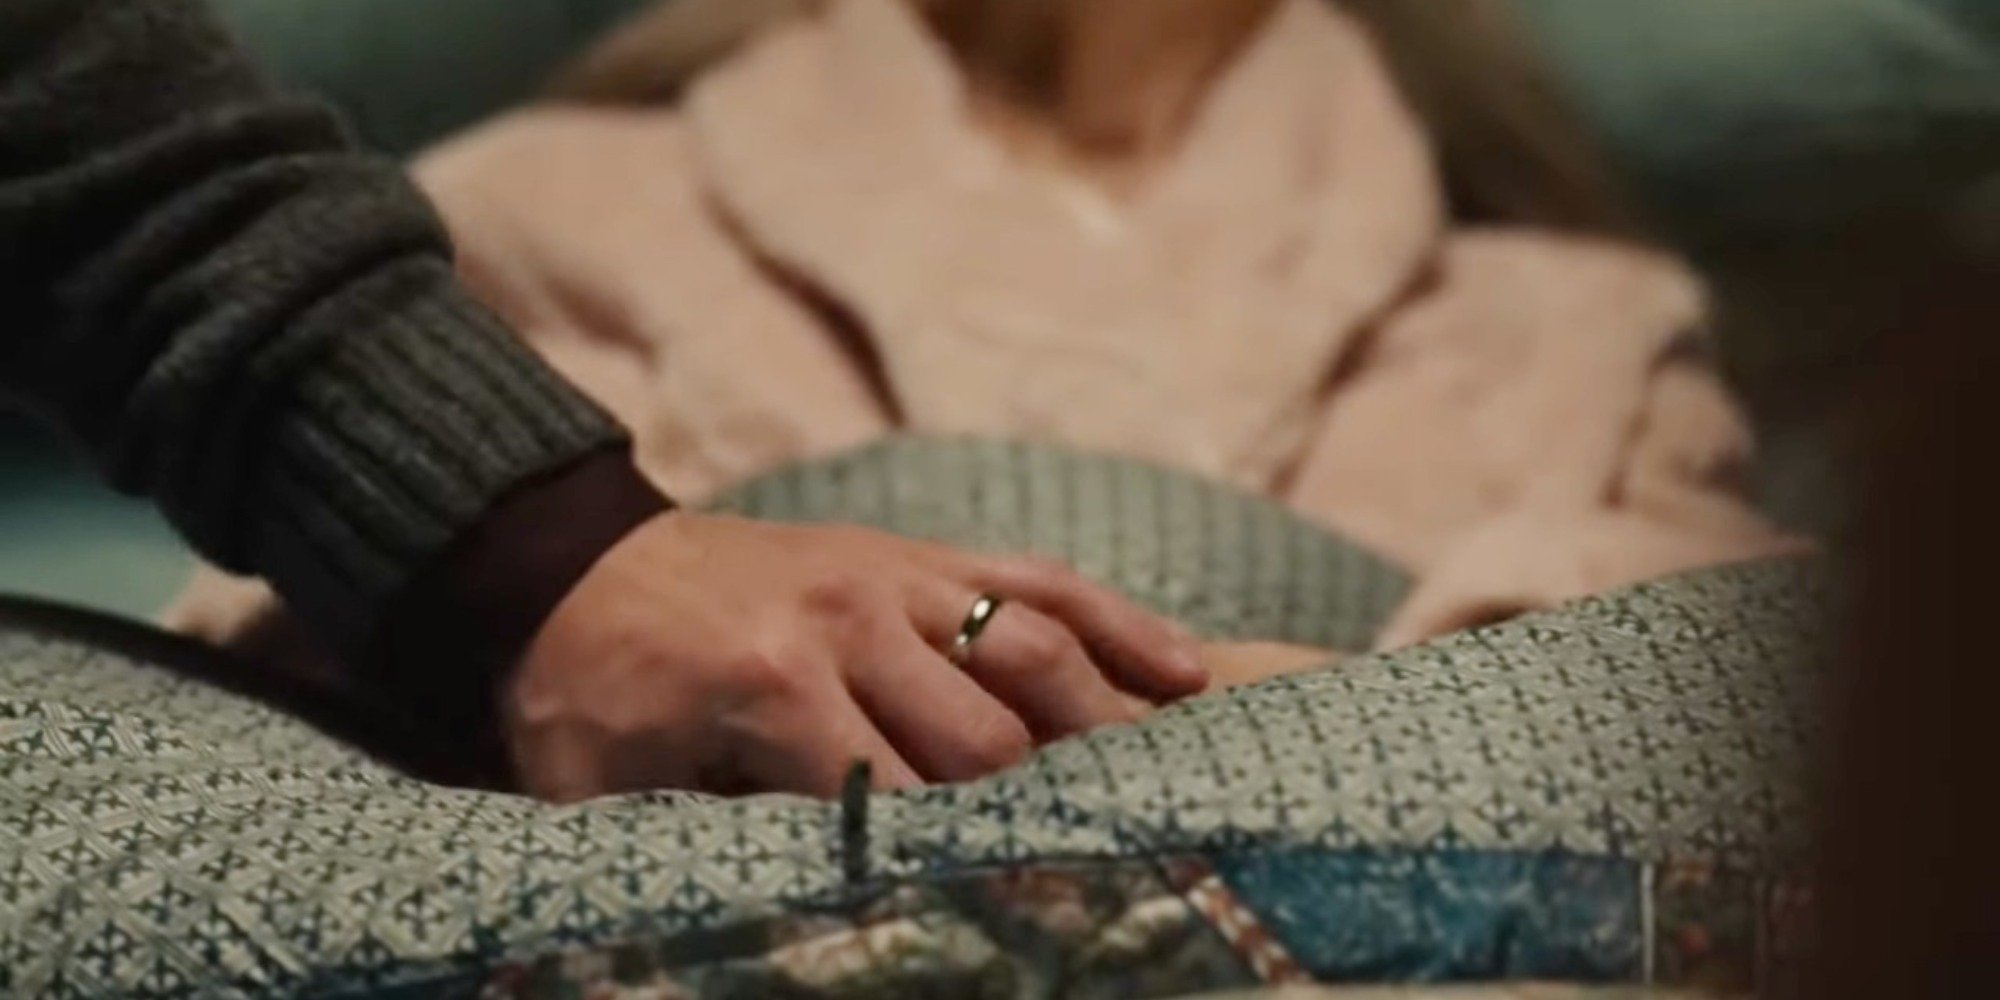 Kevin holds his mother Rebecca's hand during a screengrab from "This Is Us."